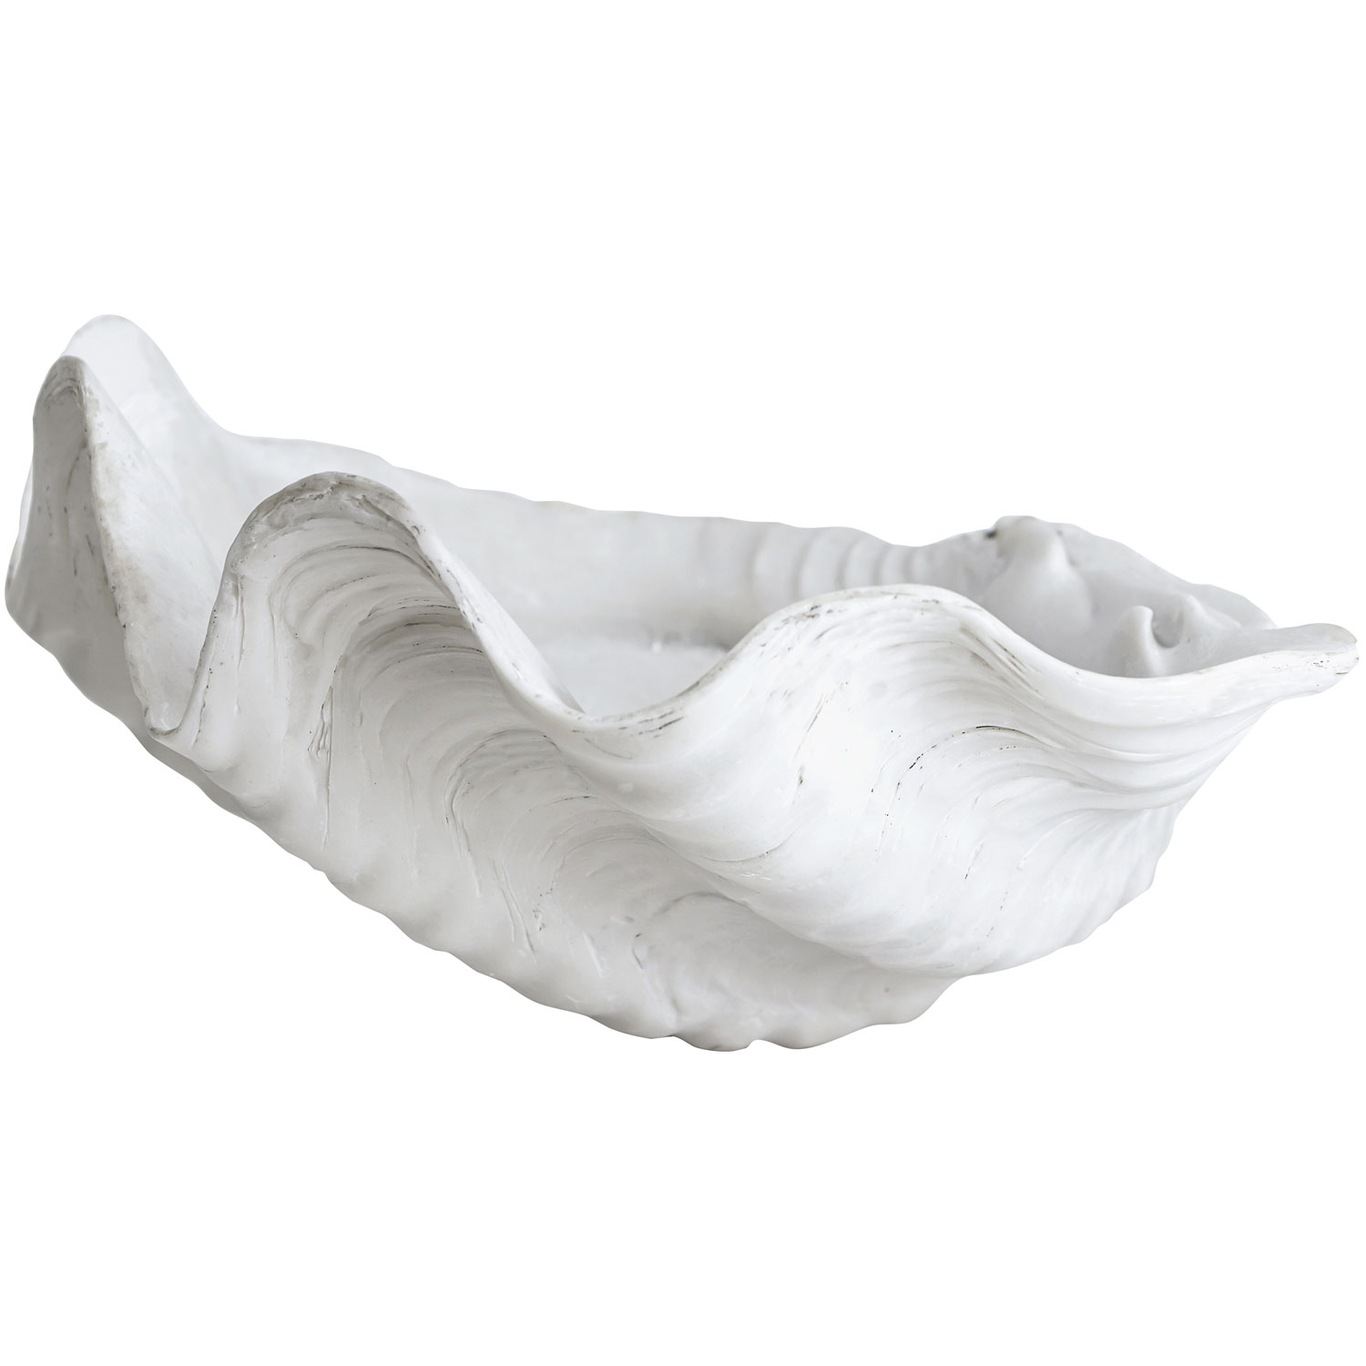 Shell Deco White, Large